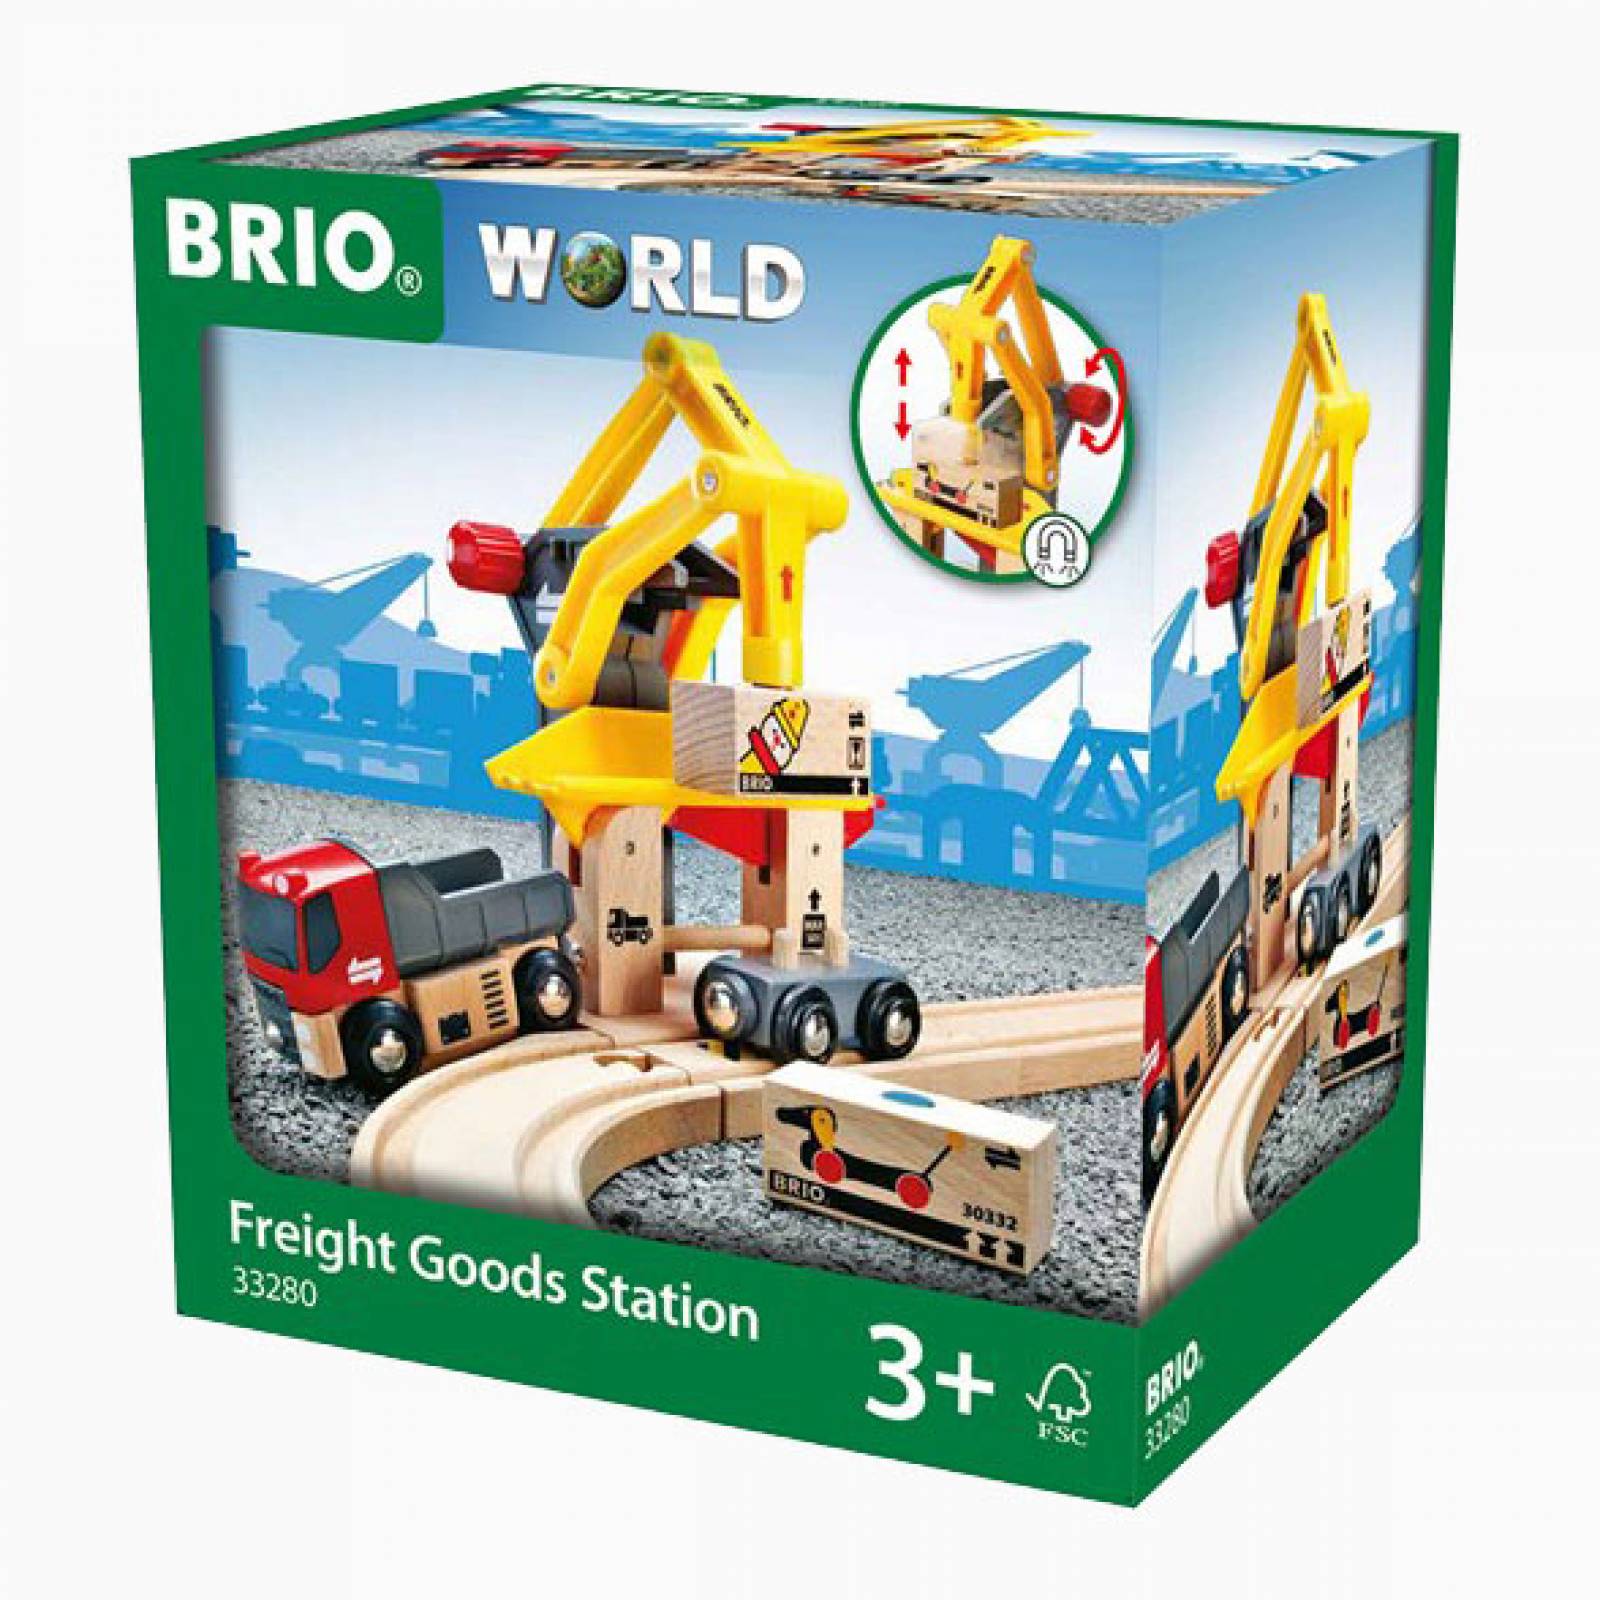 Freight Goods Station BRIO Wooden Railway Age 3+ thumbnails